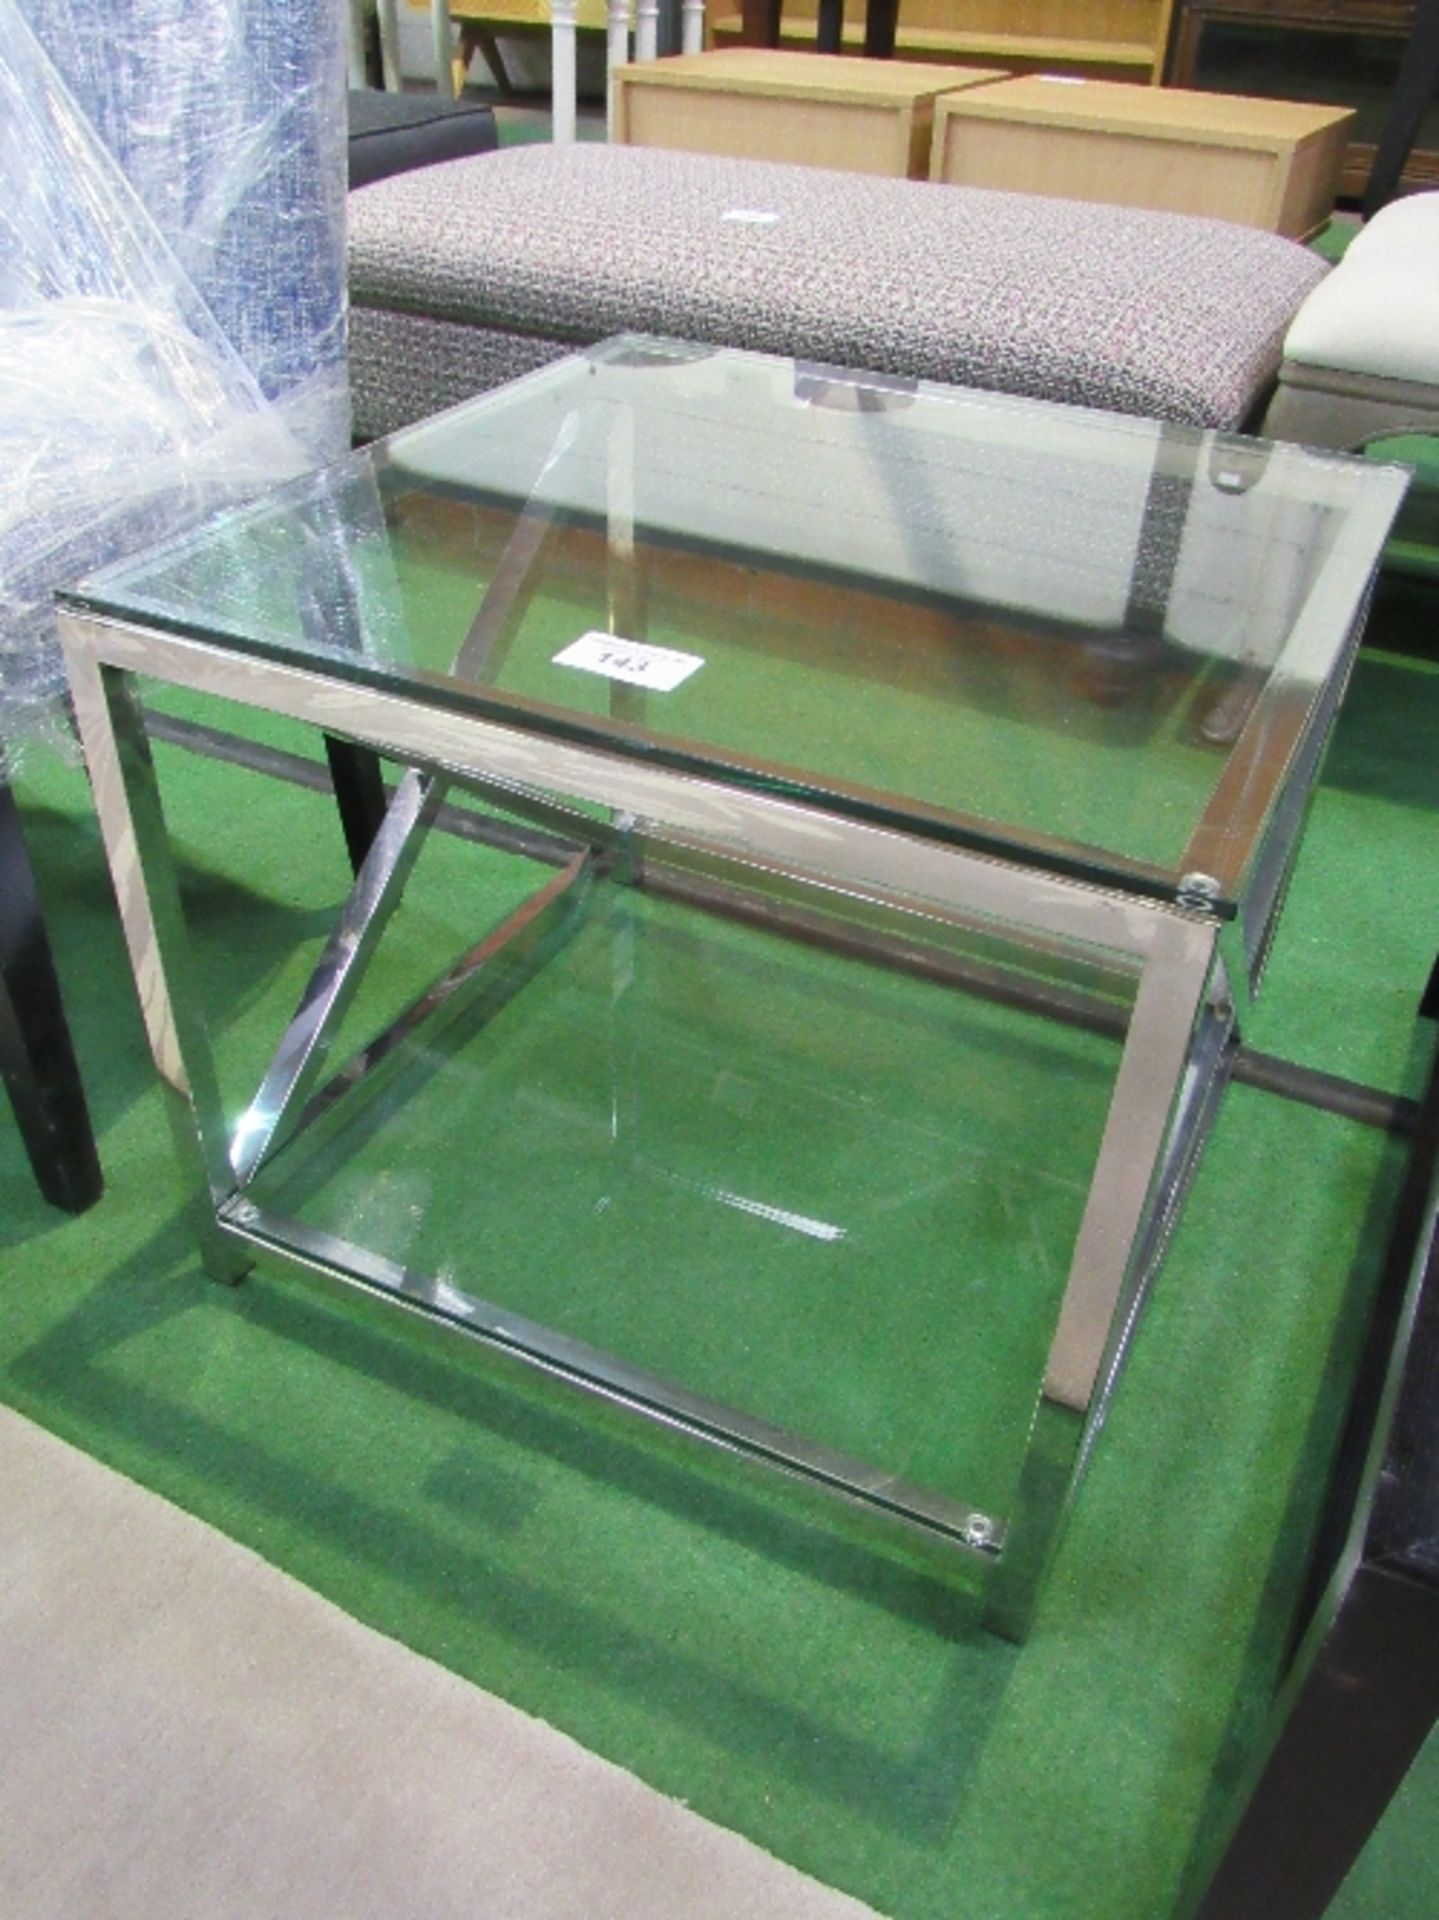 Glass & chrome low table with glass shelf beneath, 24" x 24" x 20" high - Image 3 of 3